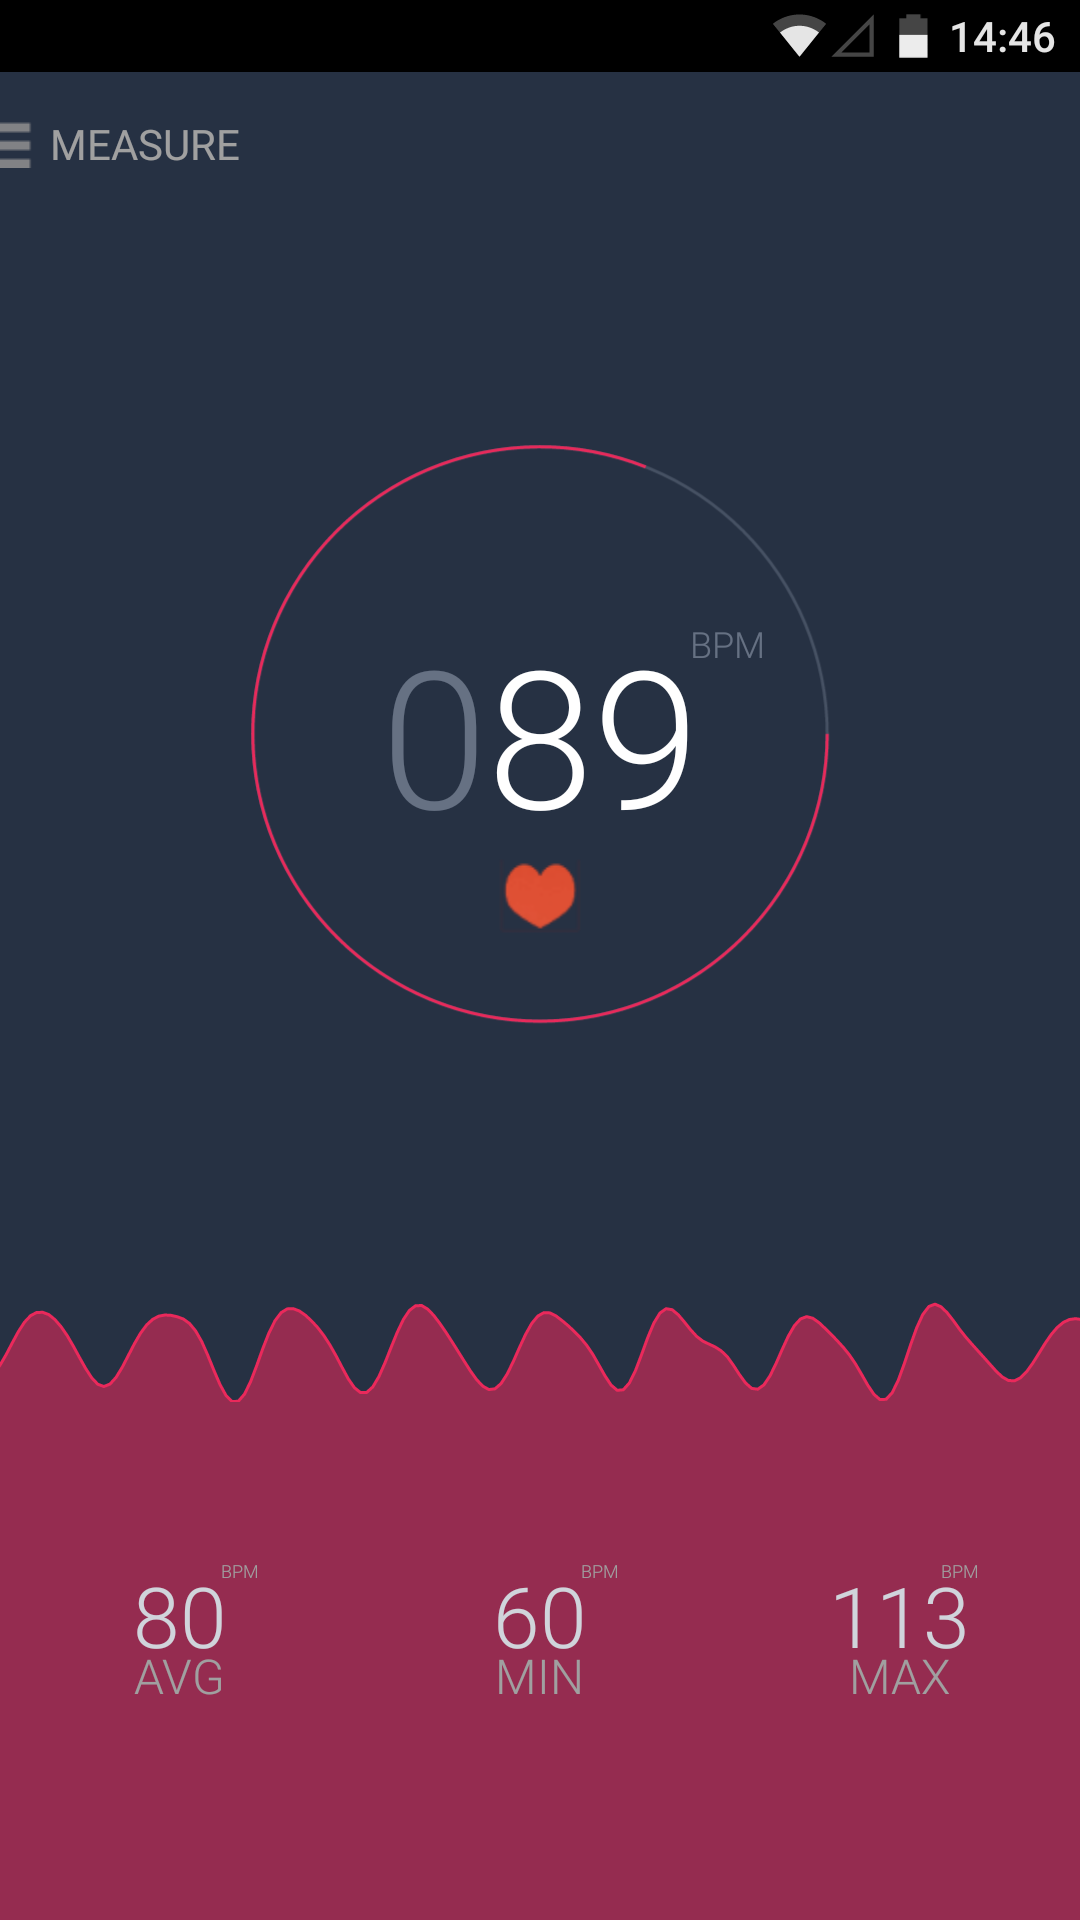 Android application Heart Rate Monitor screenshort